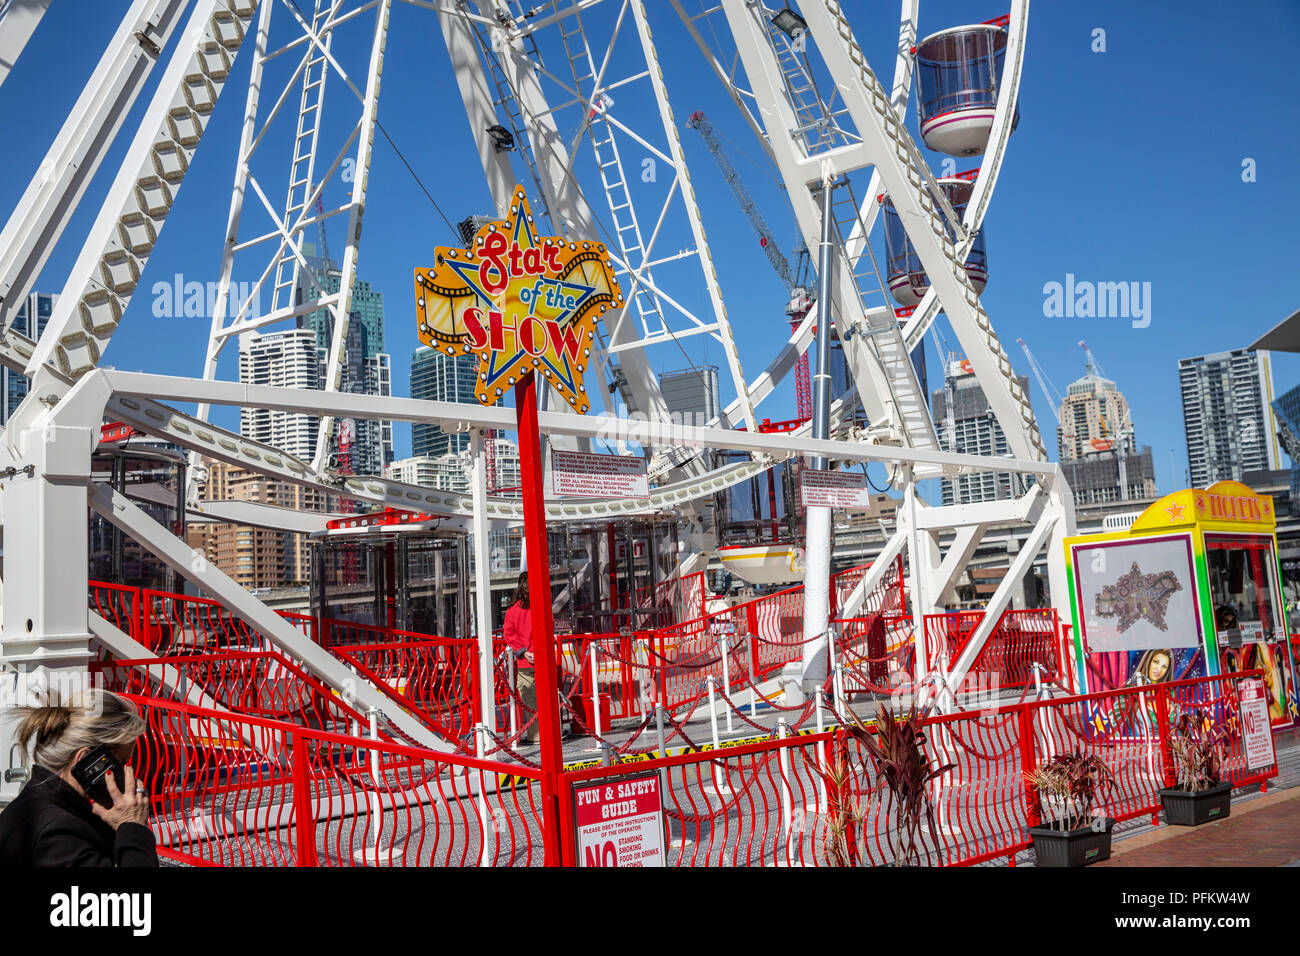 Star of the Show Giant ferris wheel ride at Darling Harbour in Sydney city centre,New south wales,Australia Stock Photo